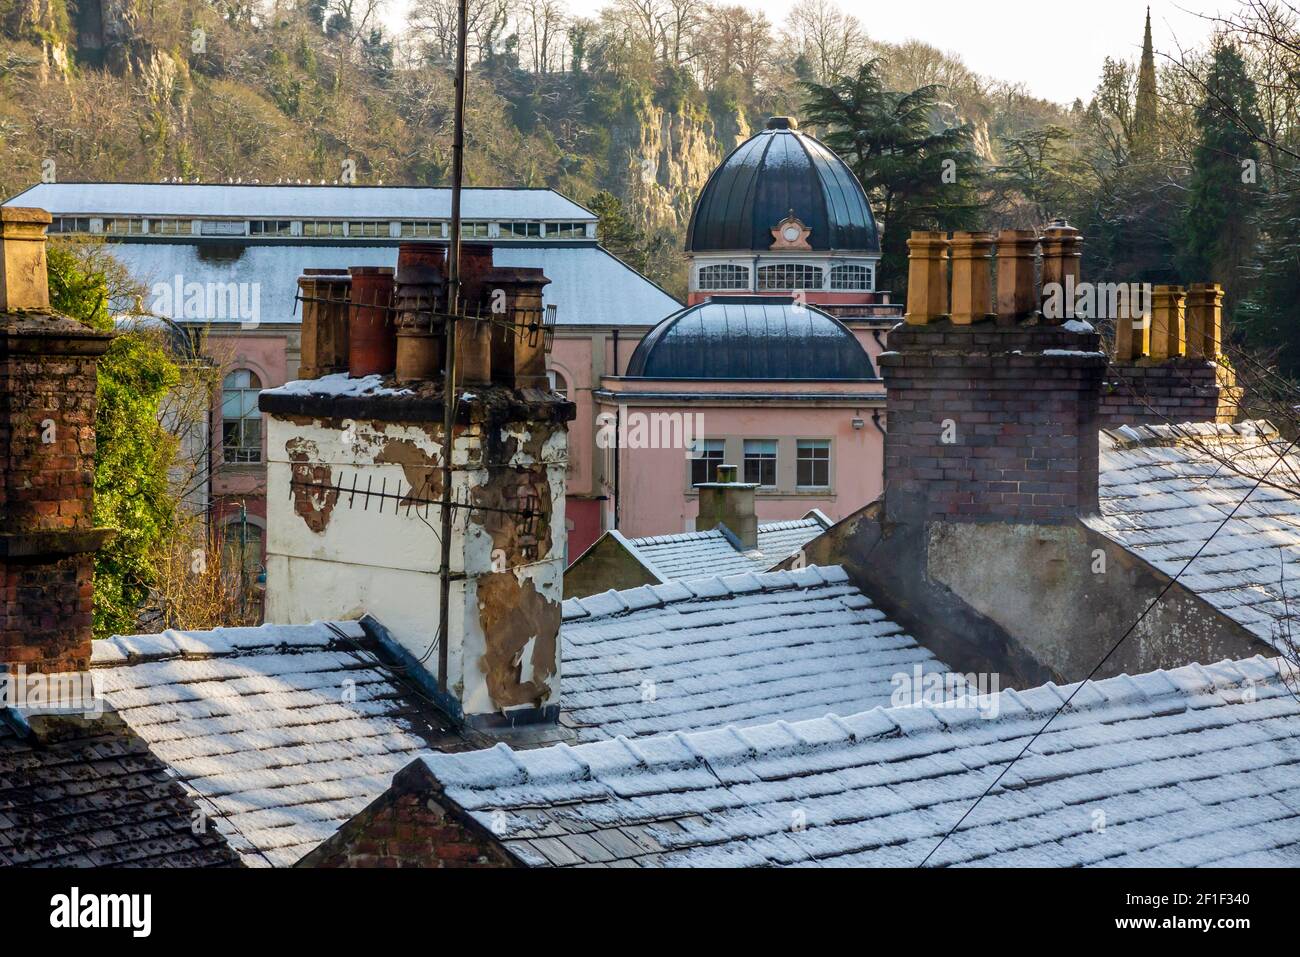 View across rooftops towards the dome and exterior of the Grand Pavilion in Matlock Bath Derbyshire Dales Peak District England UK Stock Photo